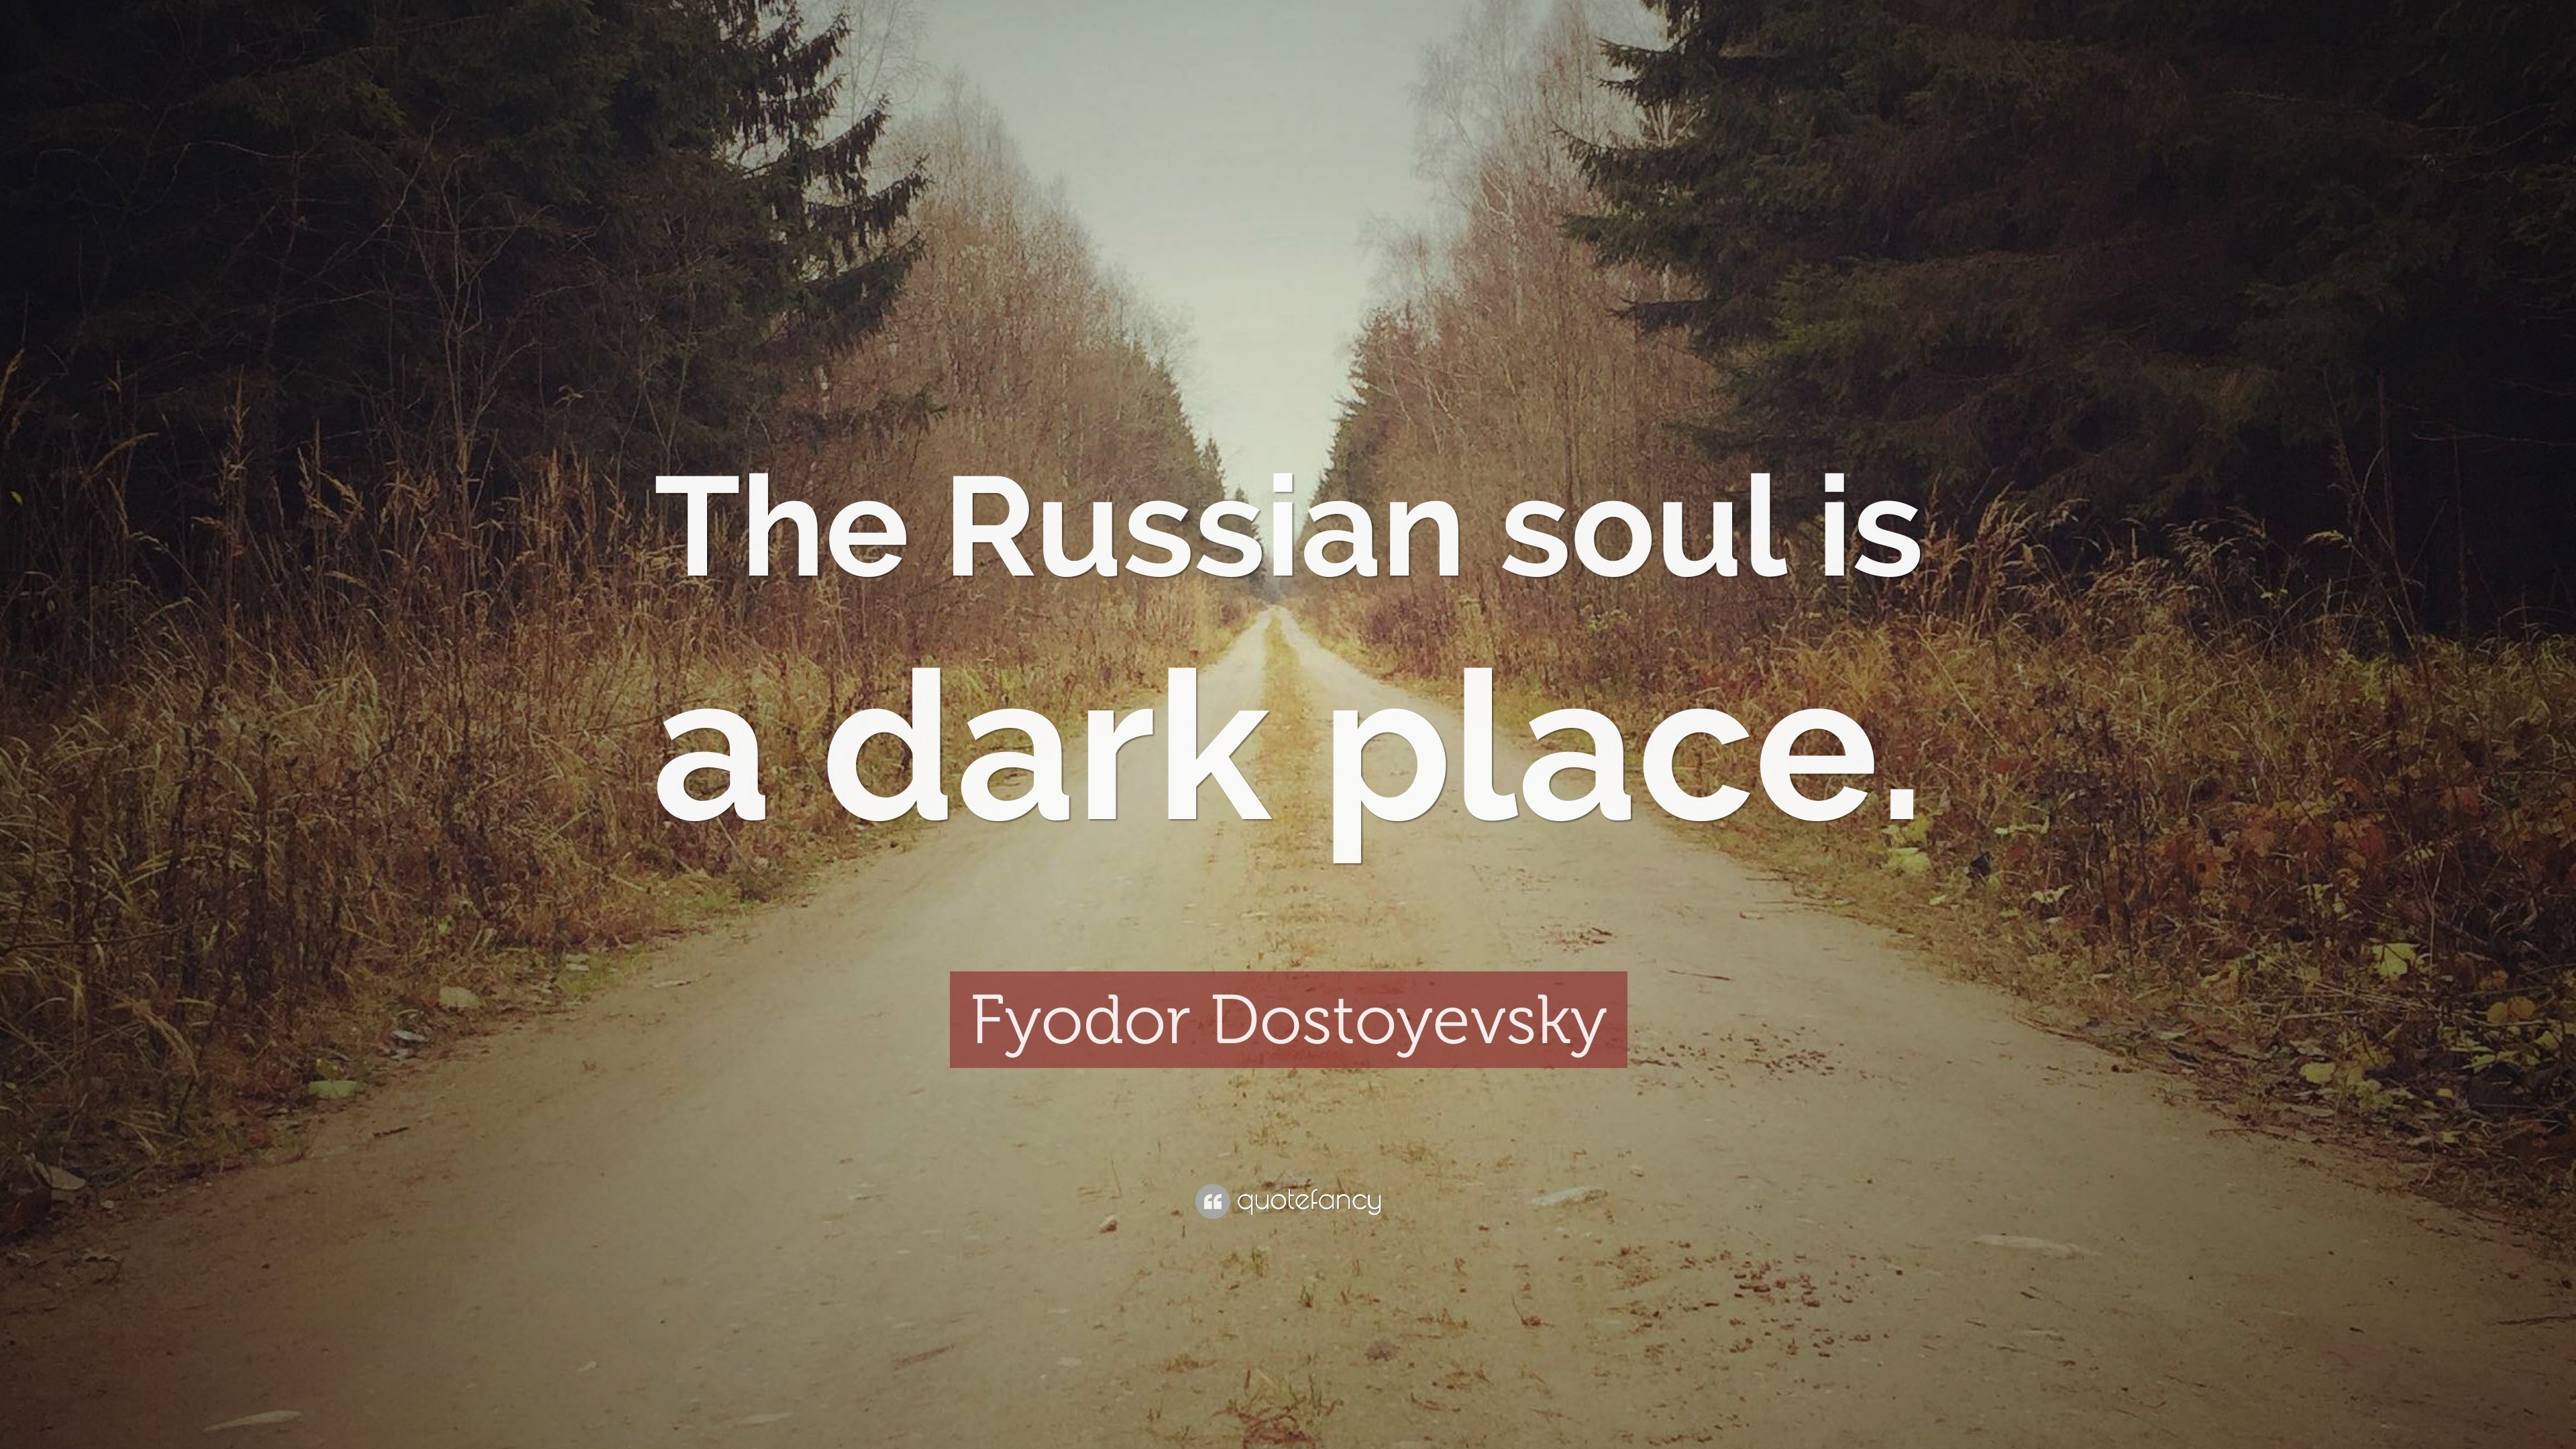 Fyodor Dostoyevsky Quote: “The Russian soul is a dark place.”